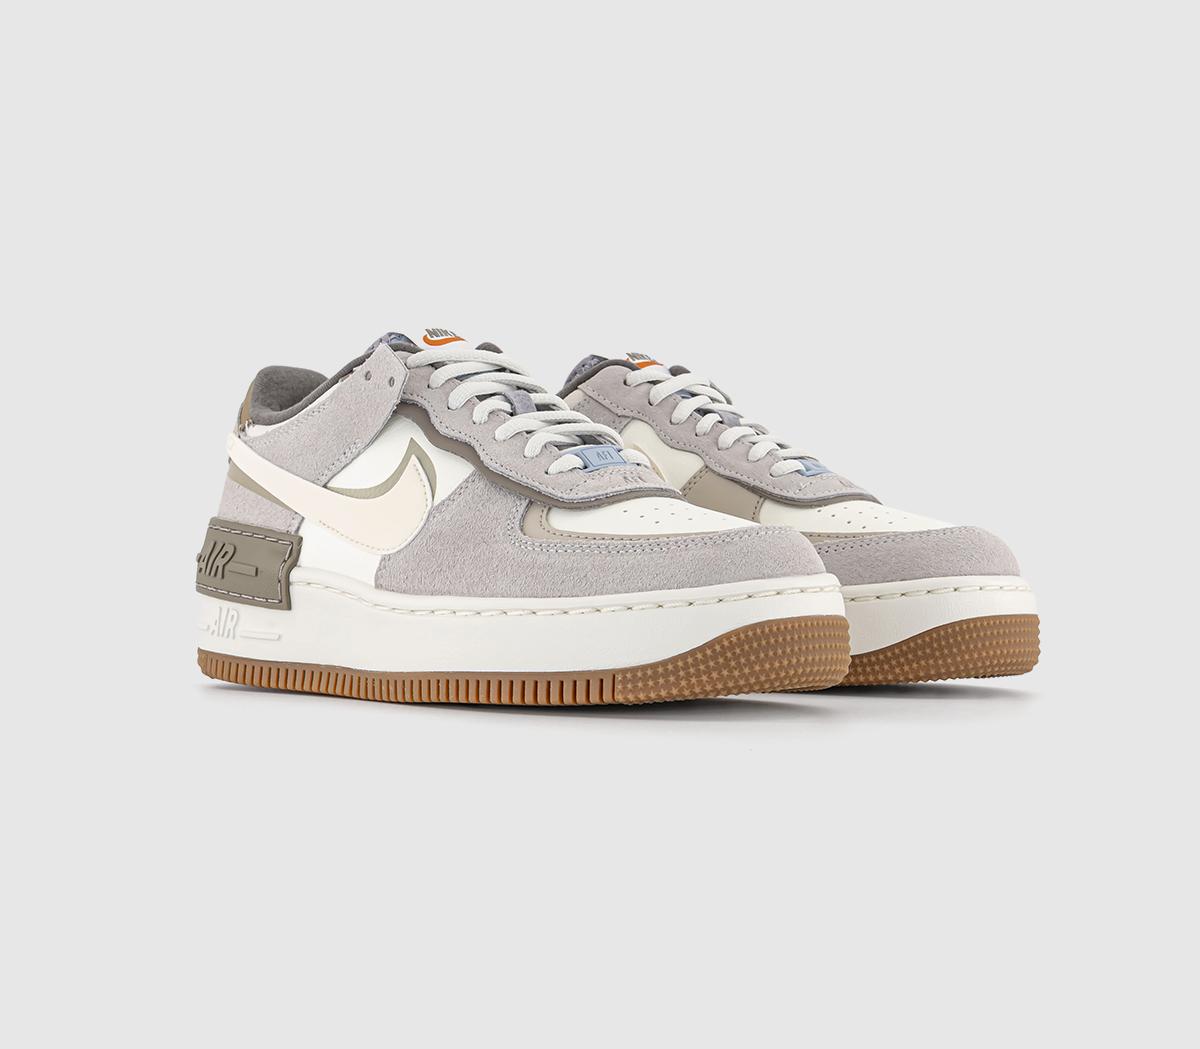 Nike Air Force 1 Shadow Trainers Sail Pale Ivory Grey Fog Provence Purple Cave White, 4.5